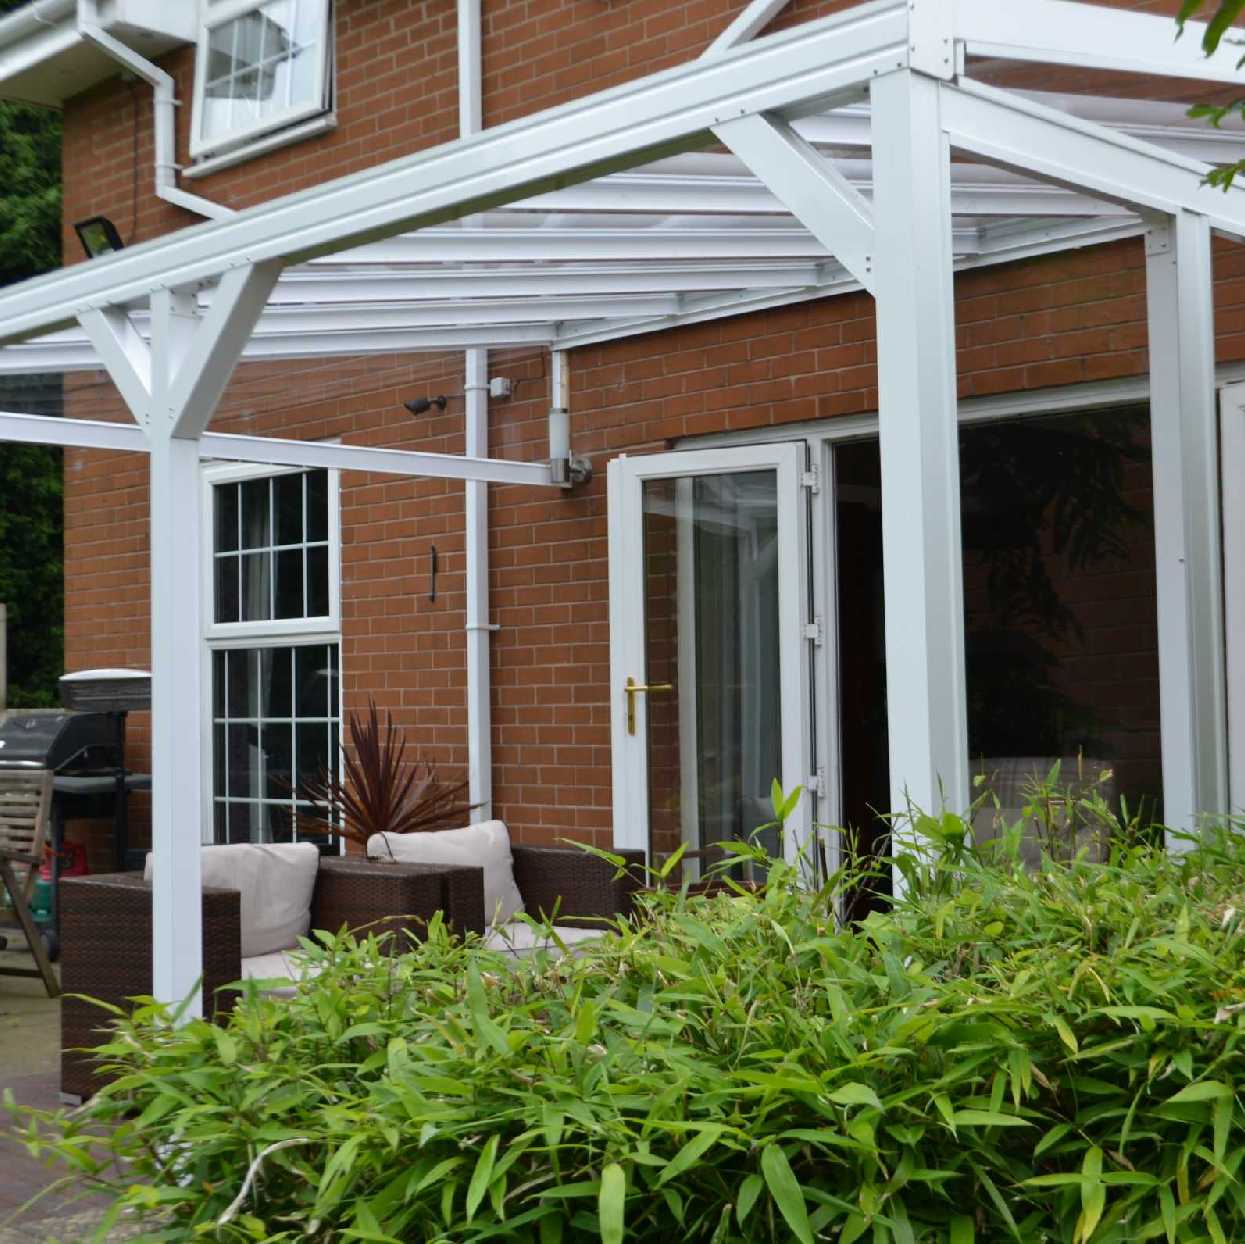 Omega Smart Lean-To Canopy, White with 6mm Glass Clear Plate Polycarbonate Glazing - 5.6m (W) x 3.0m (P), (3) Supporting Posts from Omega Build